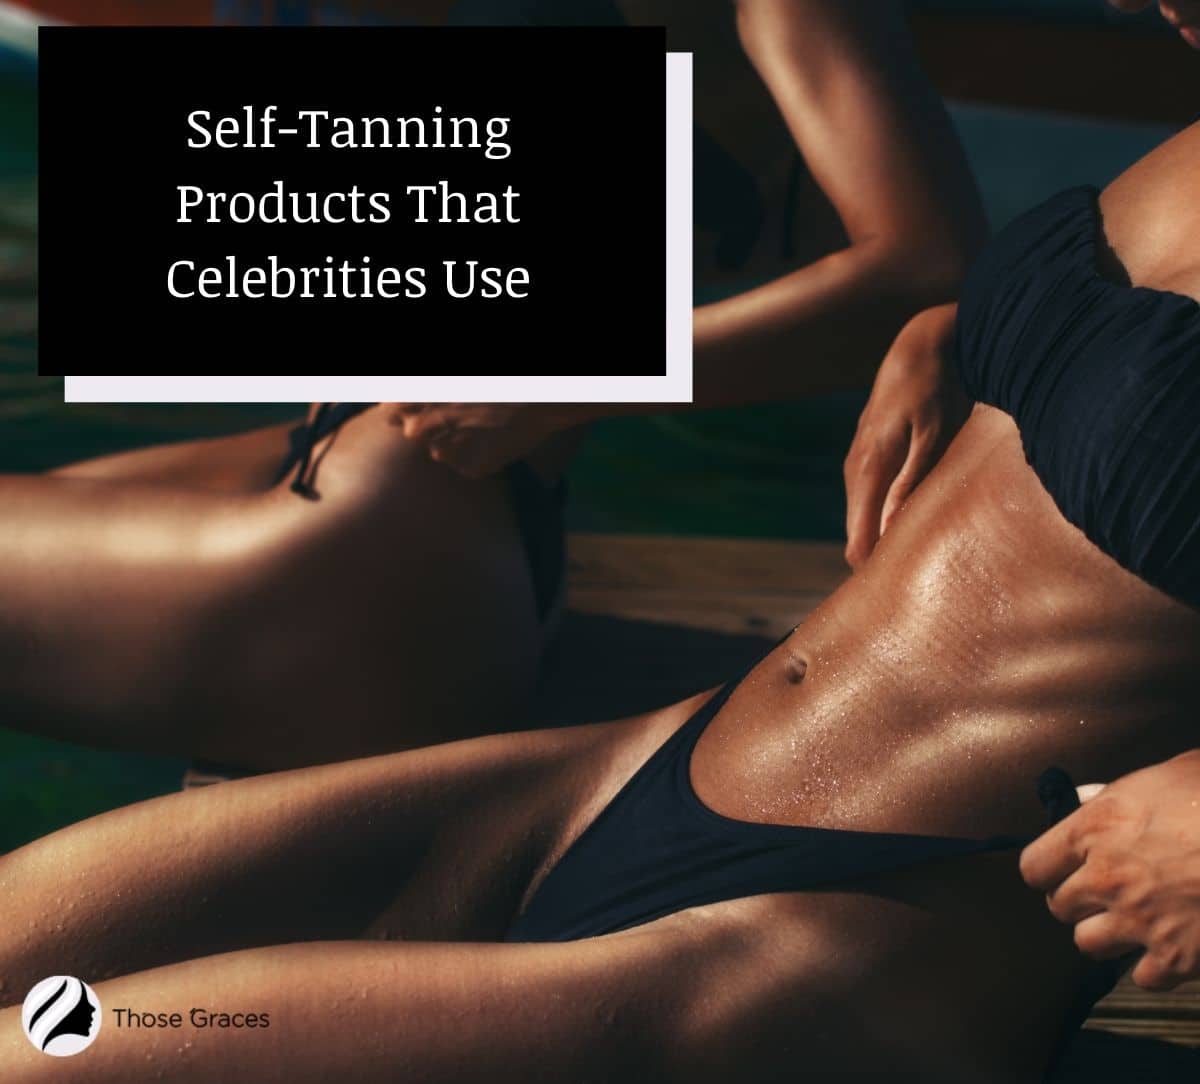 A perfect tanned body achieved through using self-tanning products that celebrities use